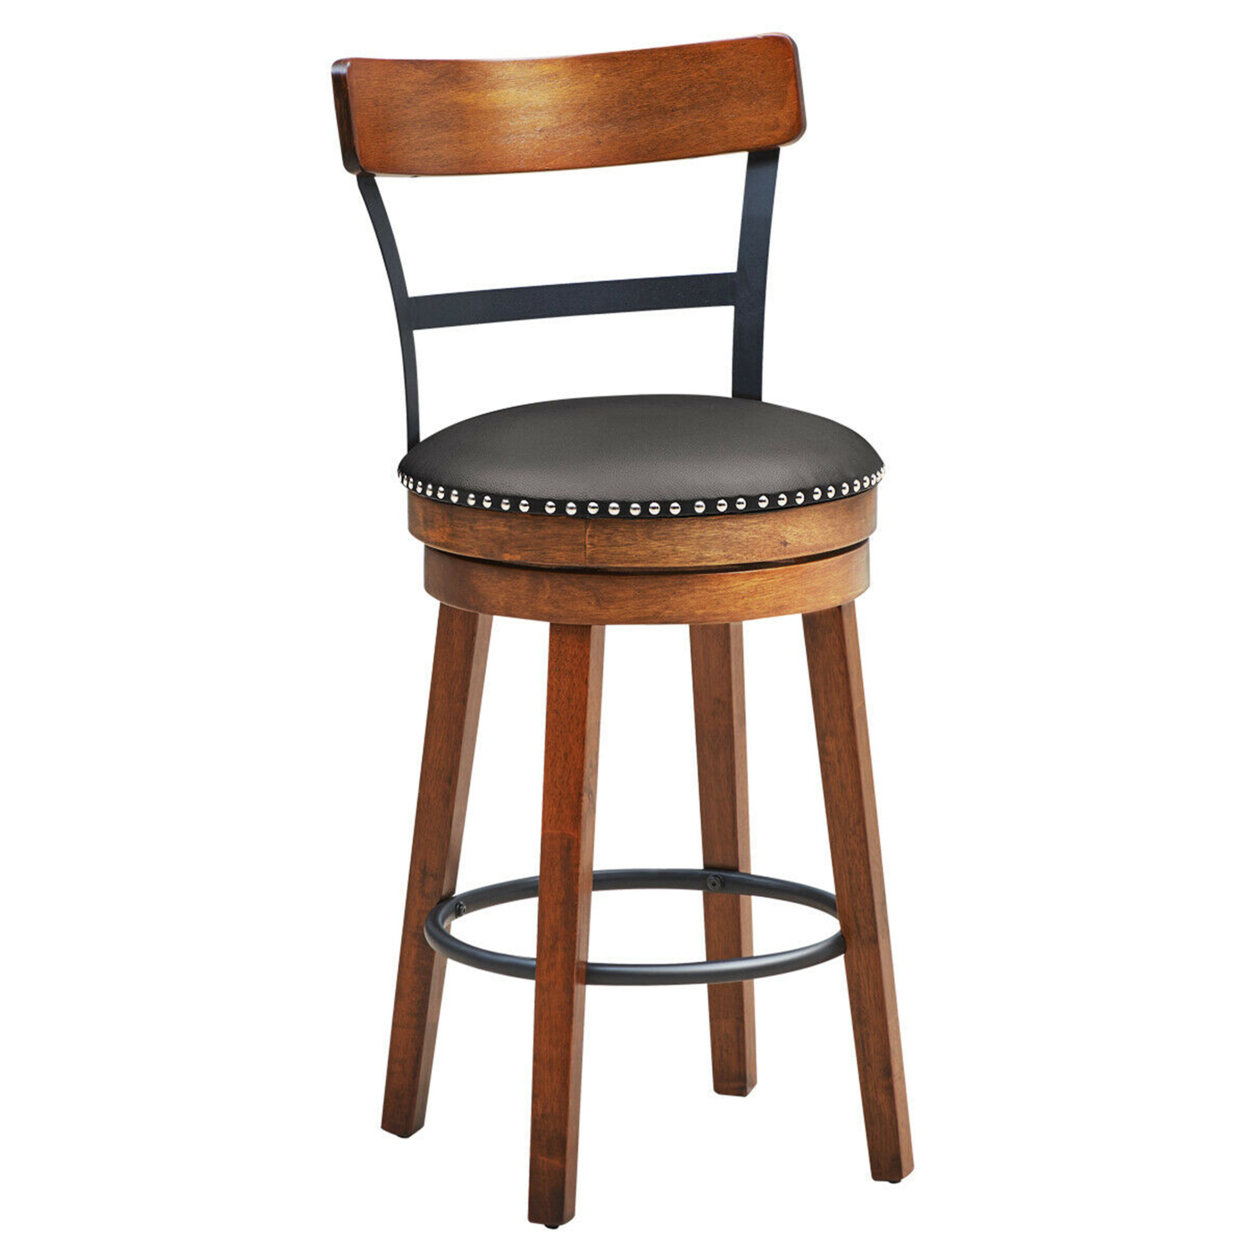 25.5'' BarStool Swivel Counter Height Kitchen Dining Bar Chair W/Rubber Wood Legs